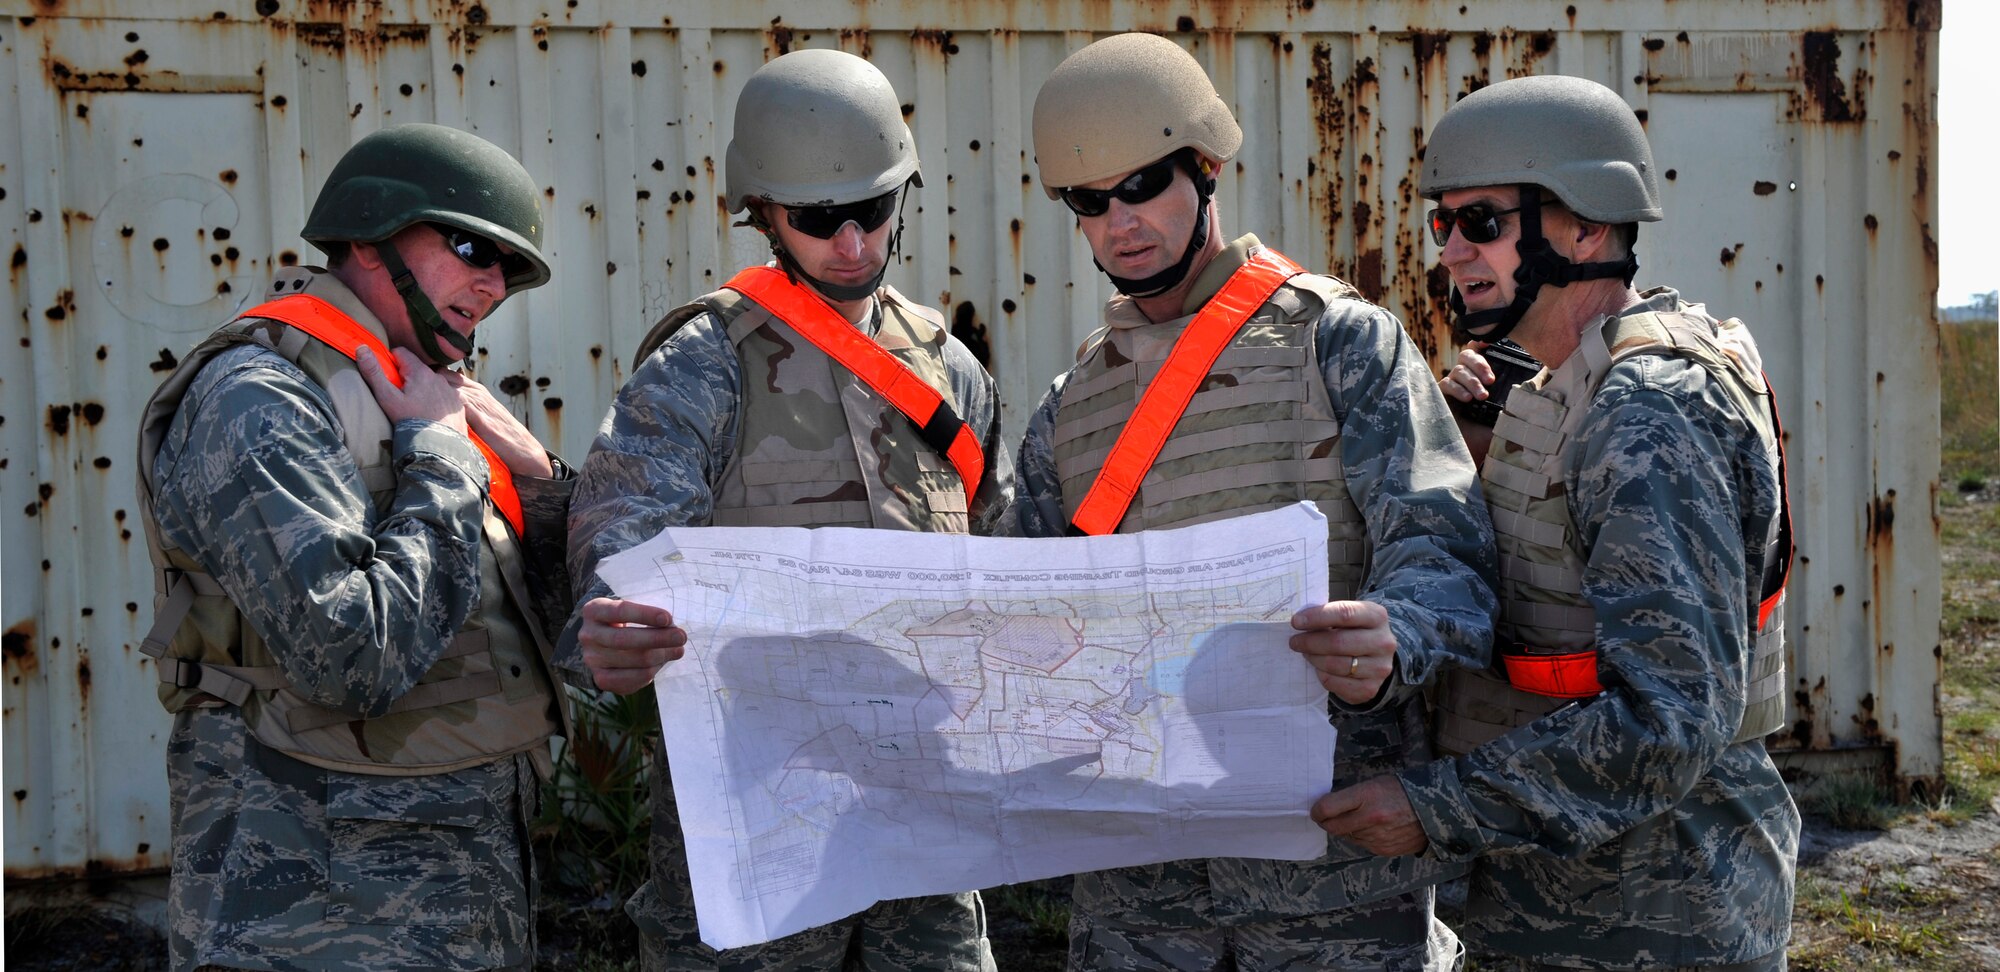 AVON PARK, Fla.-- Distinguished visitors which include Maj. Gen. Stephen Hoog, 9th Air Force commander, and Col. Gary Henderson, 23rd Wing commander from Moody Air Force Base, Ga., studies a map of the joint exercise ATLANTIC STRIKE 11-01 Feb. 16. The visitors toured different sections of the exercise to watch the joint teams in action. (U.S. Air Force photo/Airman 1st Class Nicholas Benroth)(RELEASED)